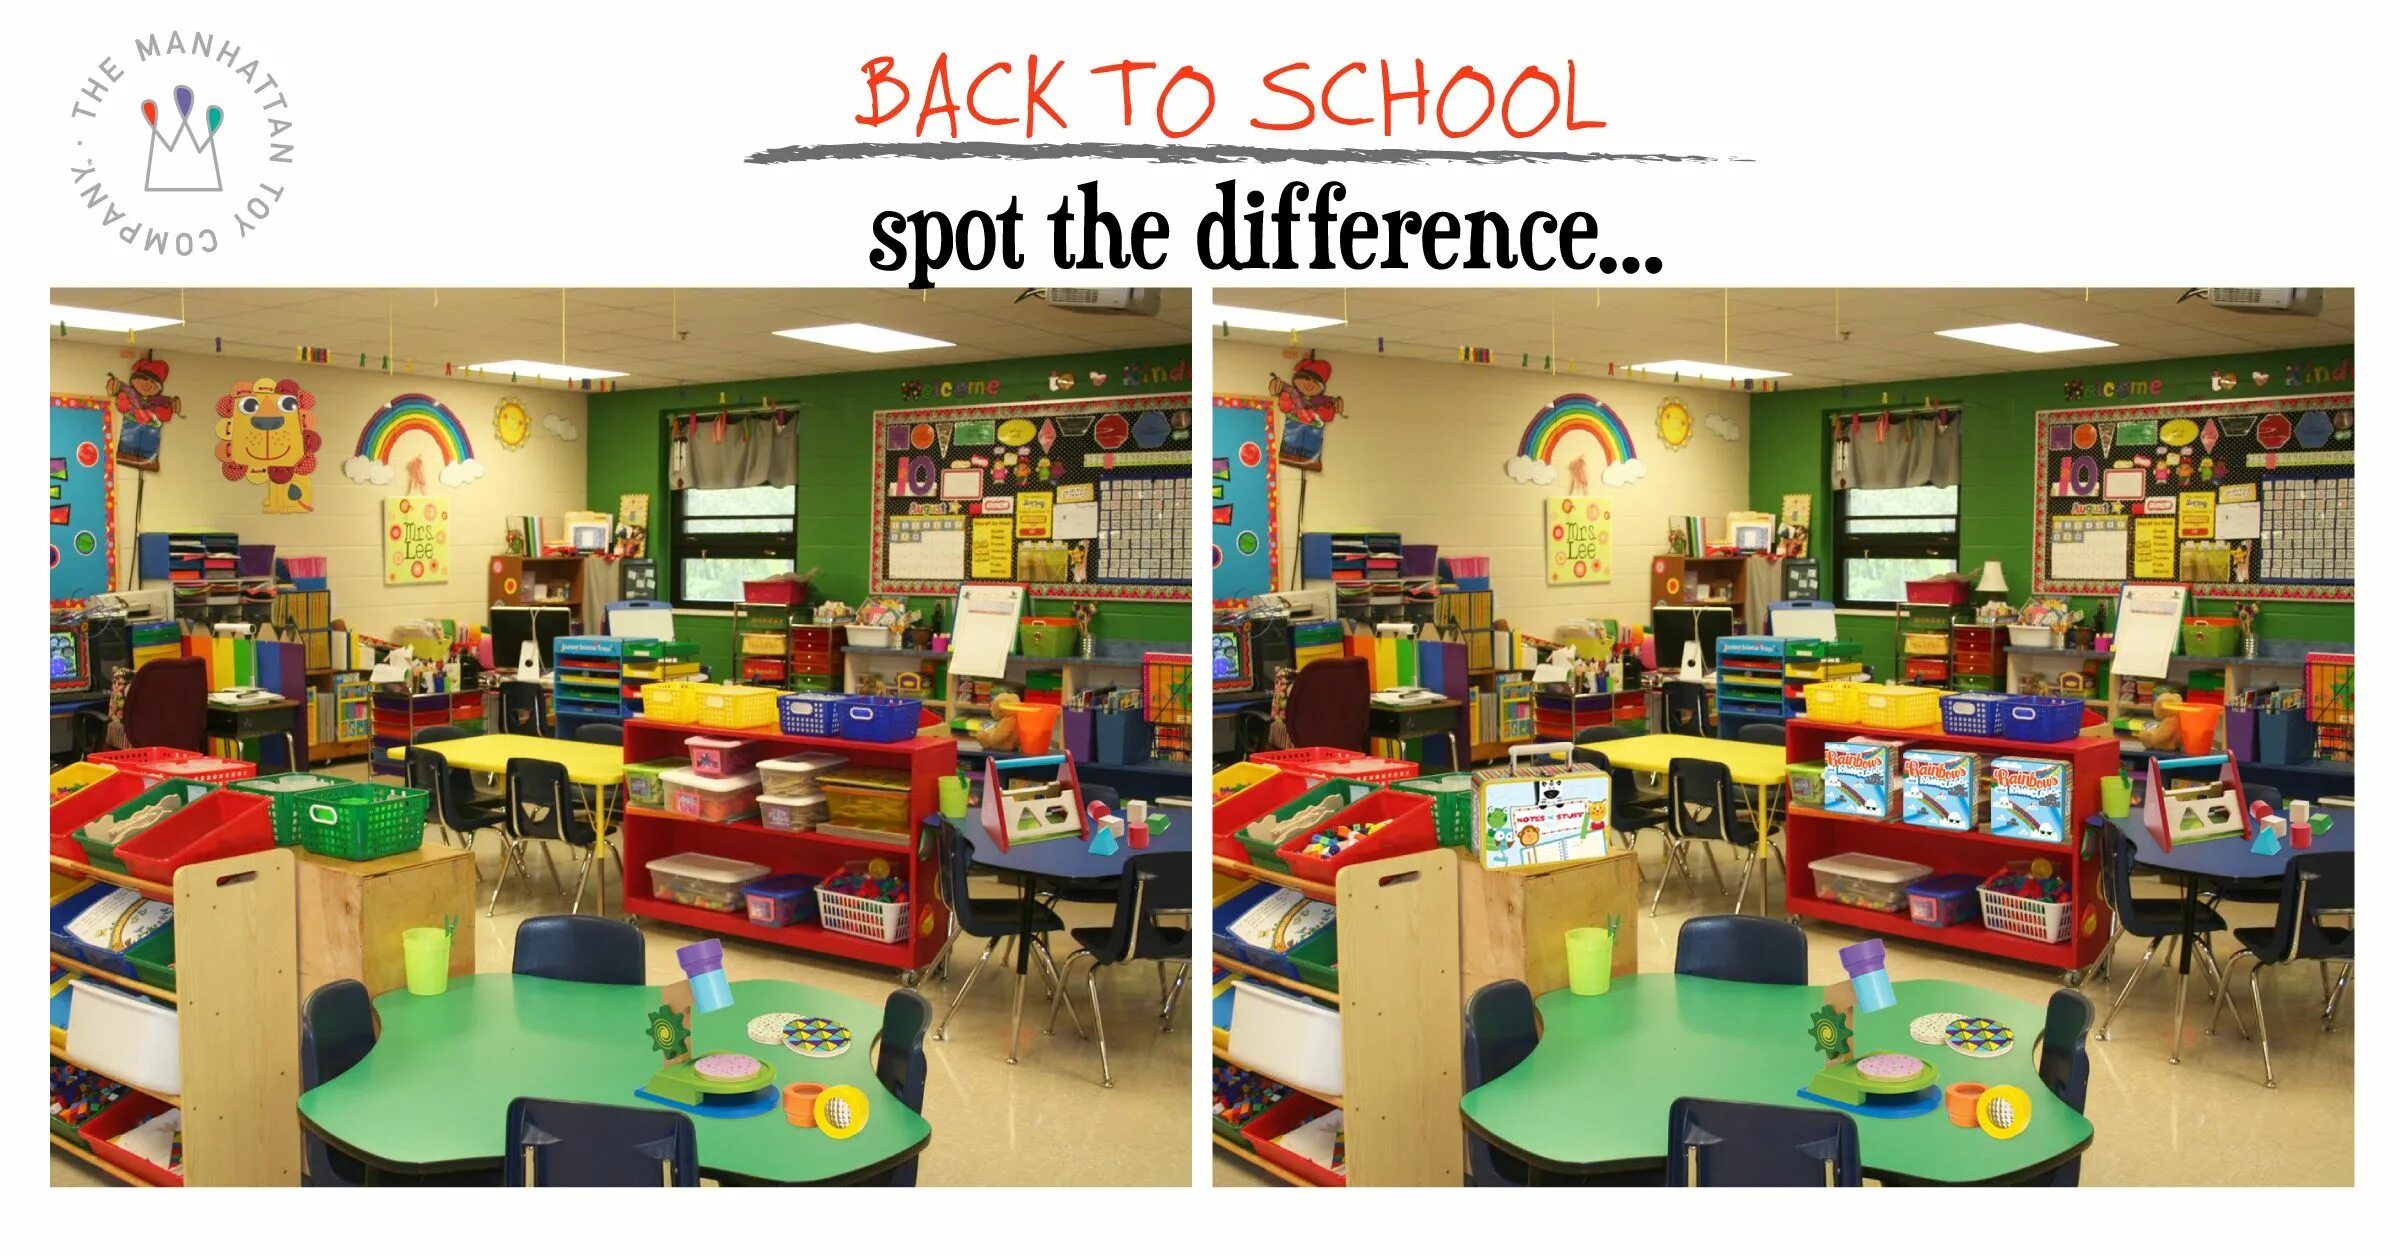 Spot the difference Classroom. Classroom find the differences. Find differences School. Differences in the Classroom.